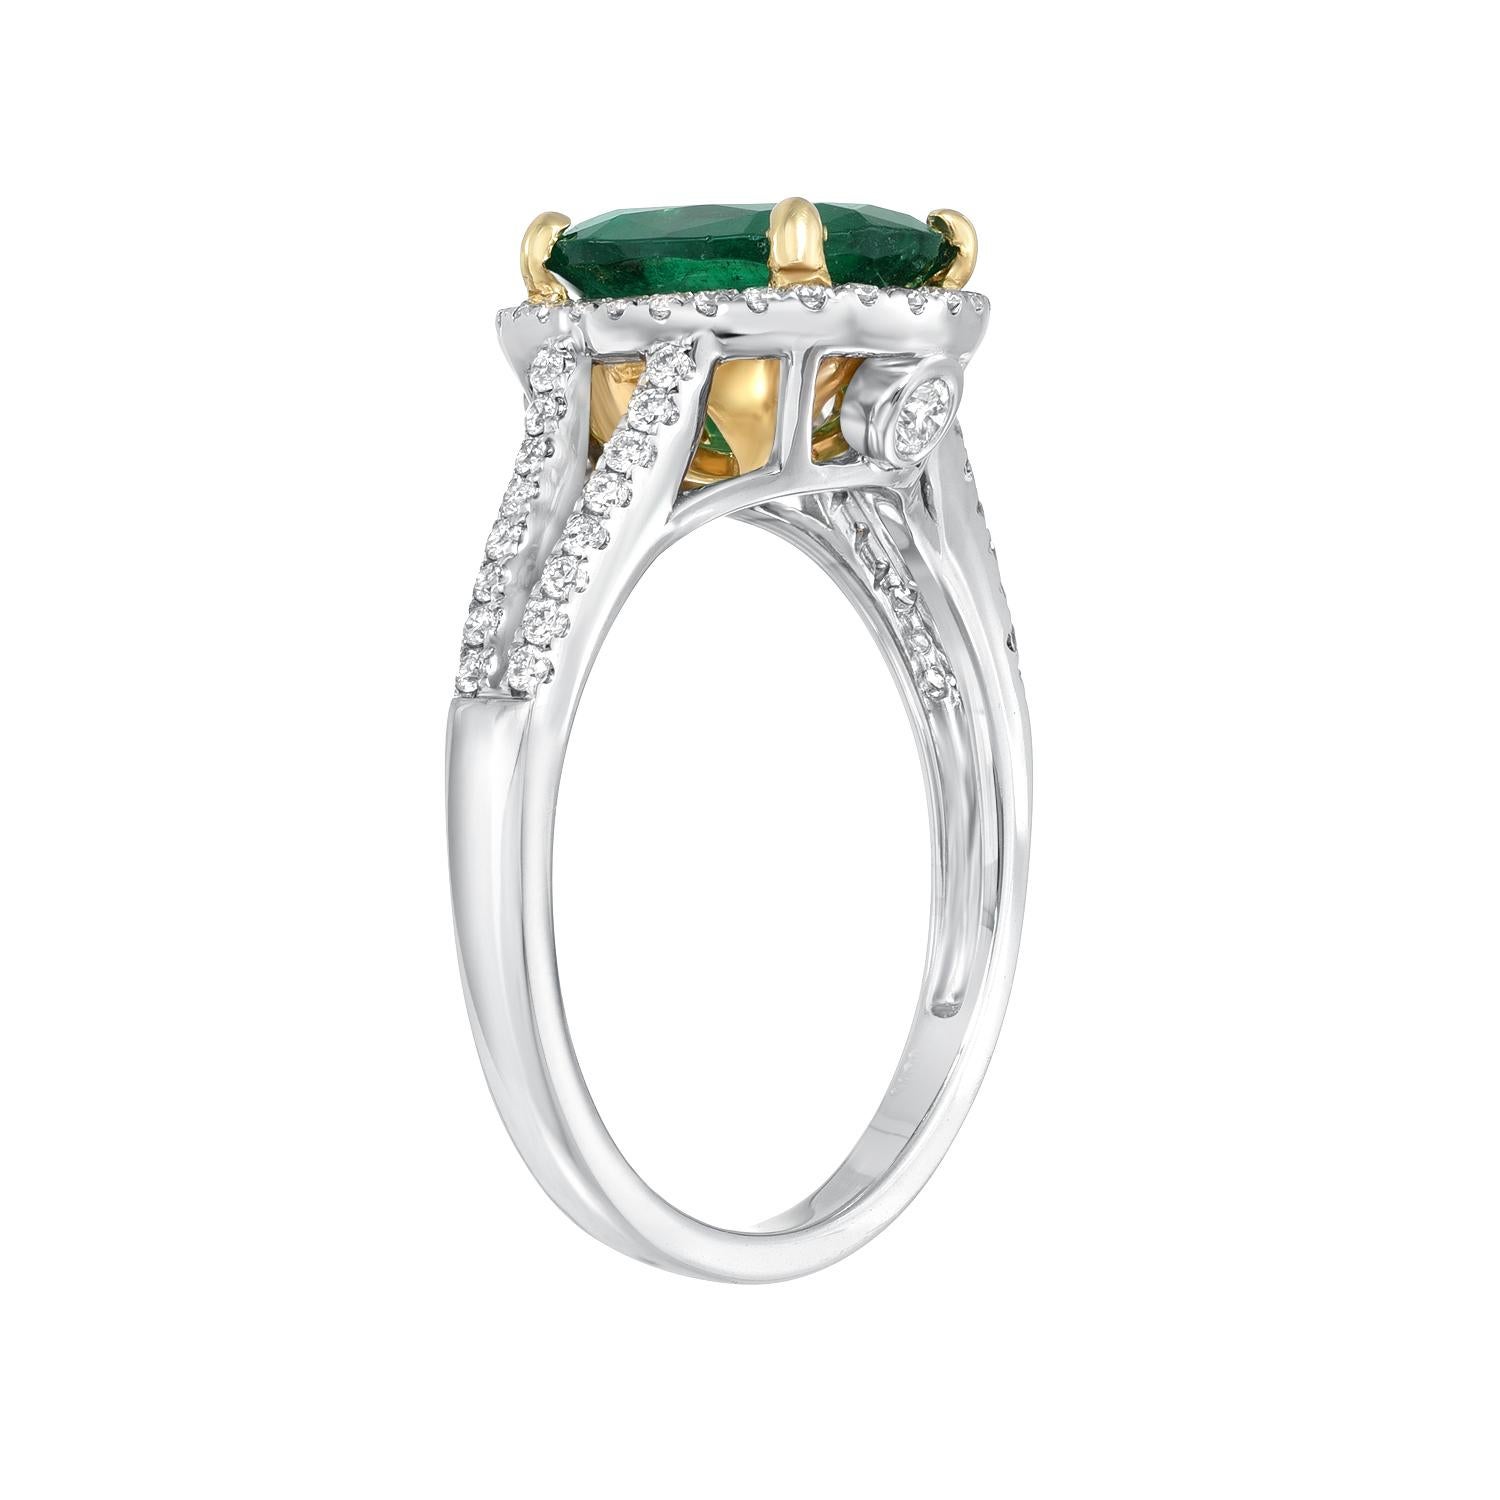 1.75 carat oval Emerald ring in 18K white and yellow gold, surrounded by round brilliant diamonds weighing a total of 0.42 carats.
Size 6.5. Re-sizing is complimentary upon request.
Returns are accepted and paid by us within 7 days of